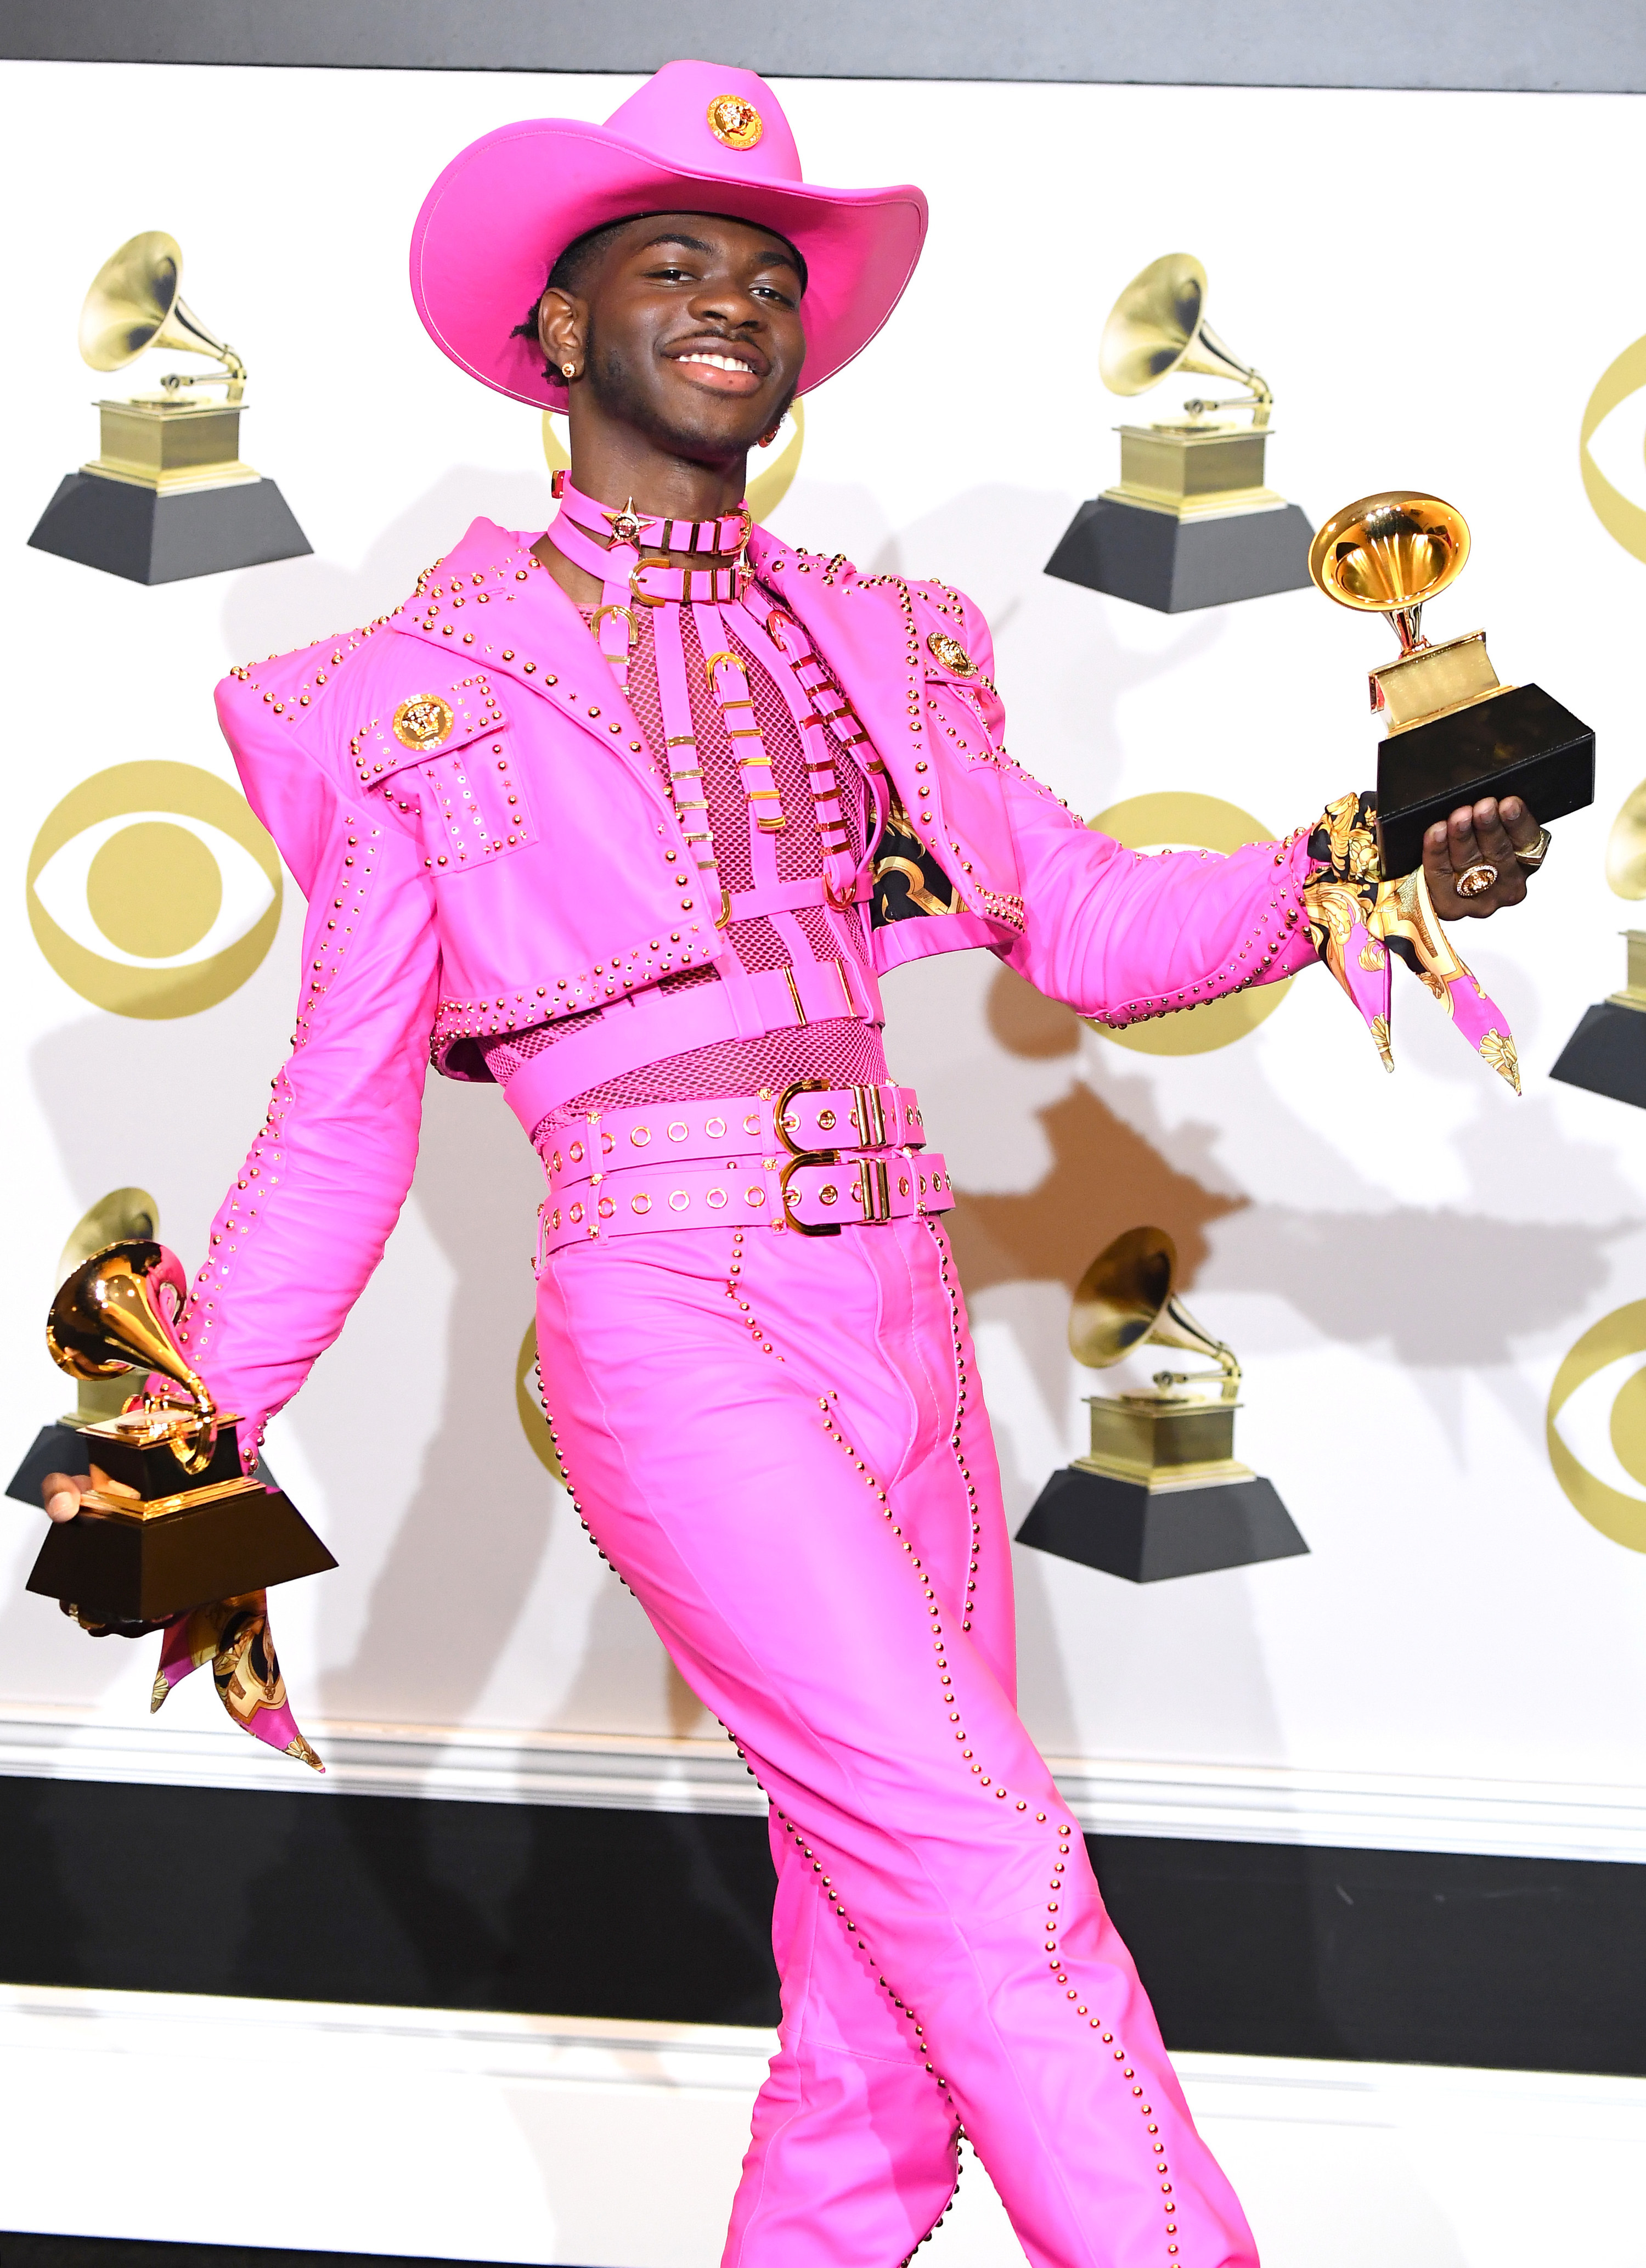 Lil Nas X holding his two Grammy awards backstage. He&#x27;s wearing a brightly-colored cowboy outfit complete with the hat